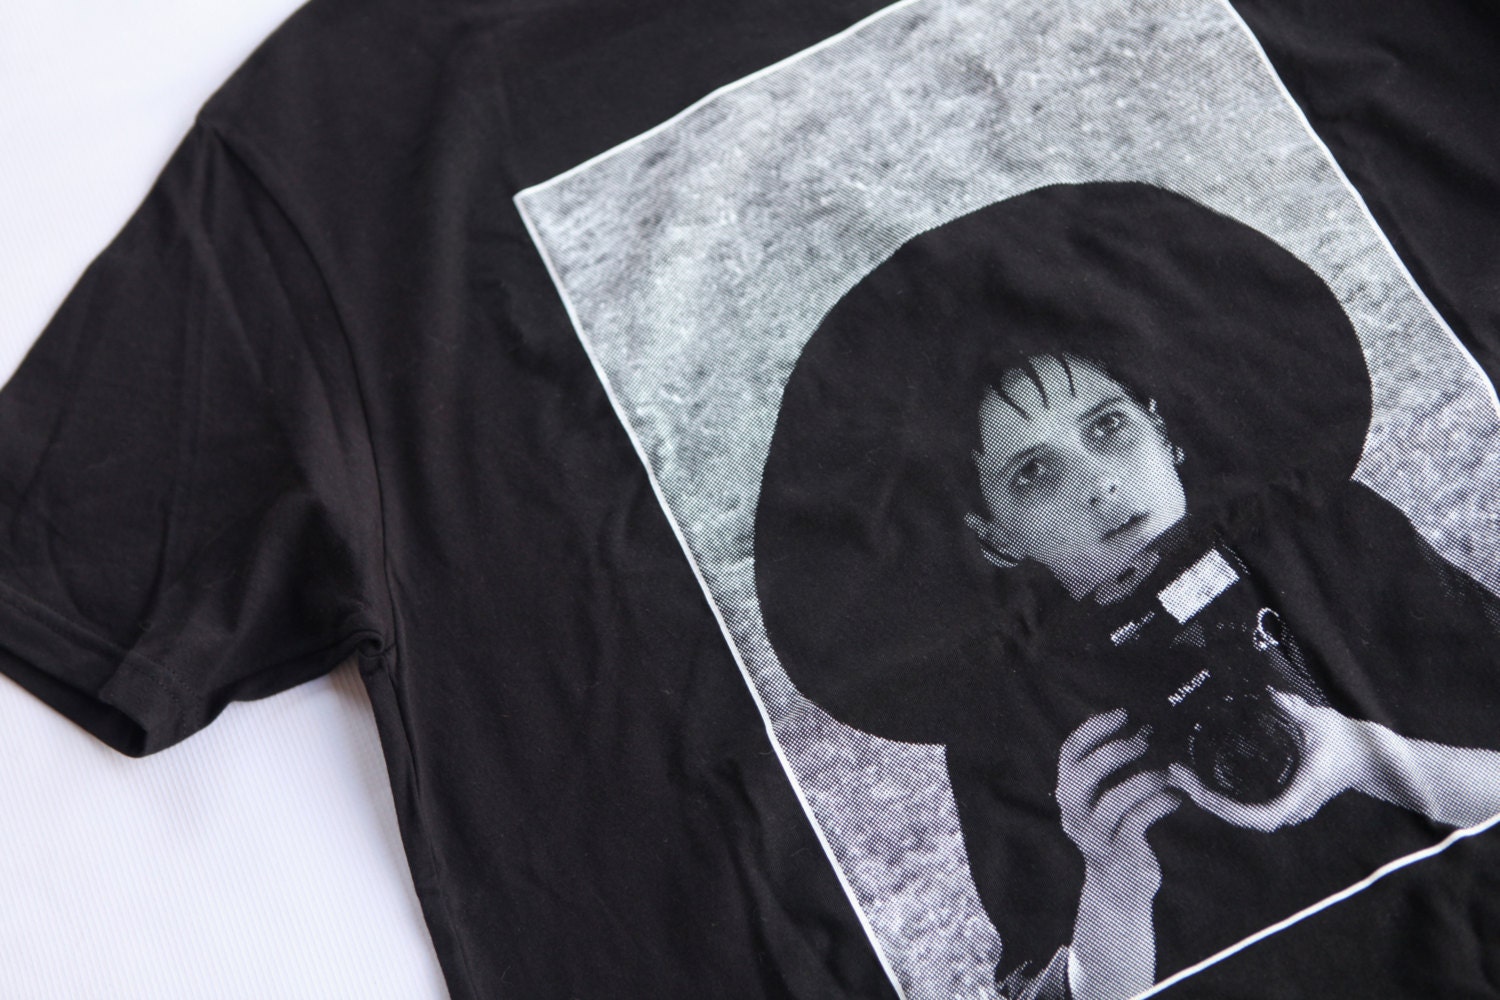 New LYDIA DEETZ Winona Ryder BEETLEJUICE T-Shirt by ...